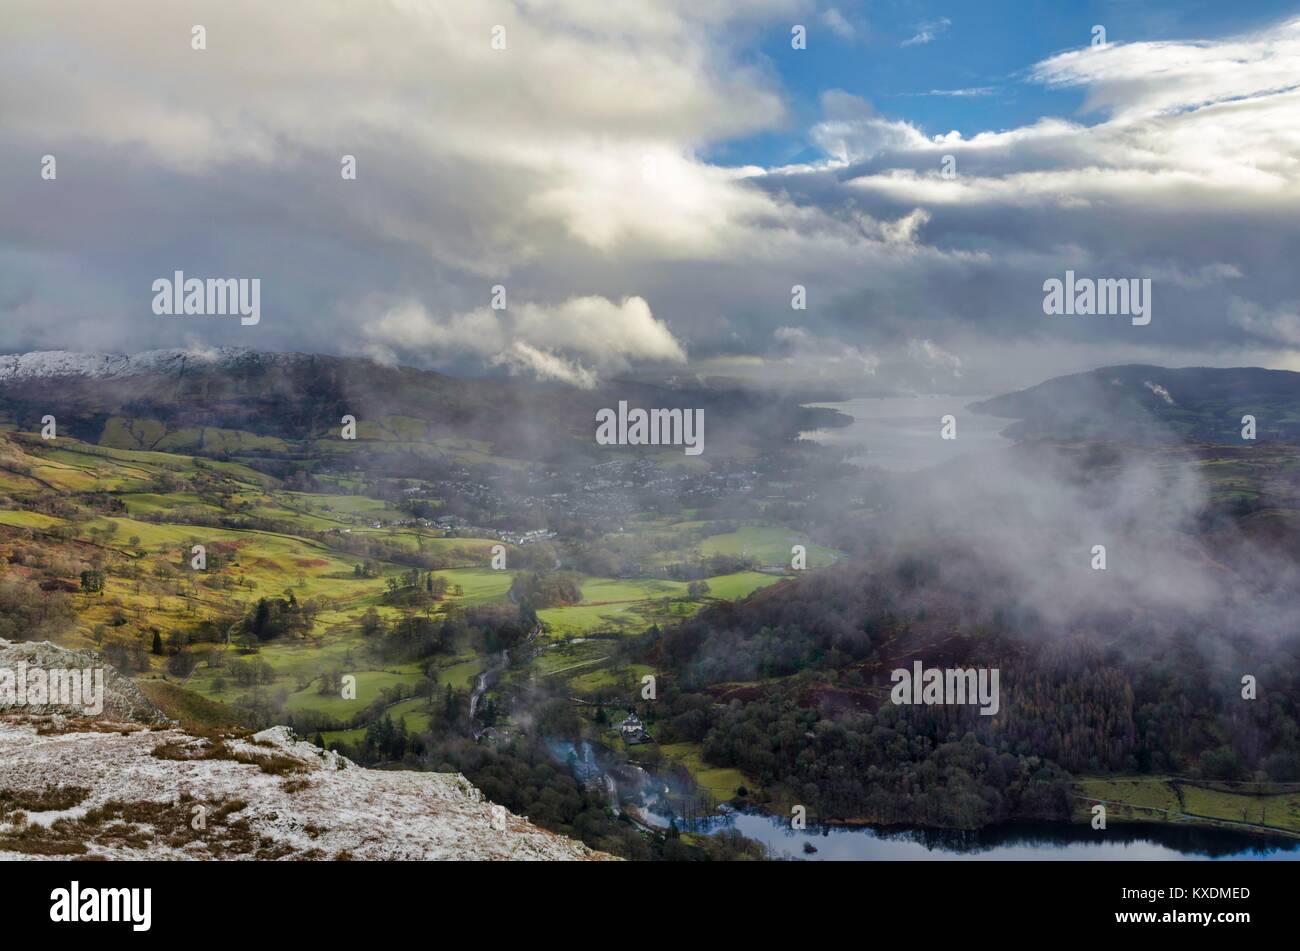 Dramatic clouds and mist on Nab Scar Stock Photo